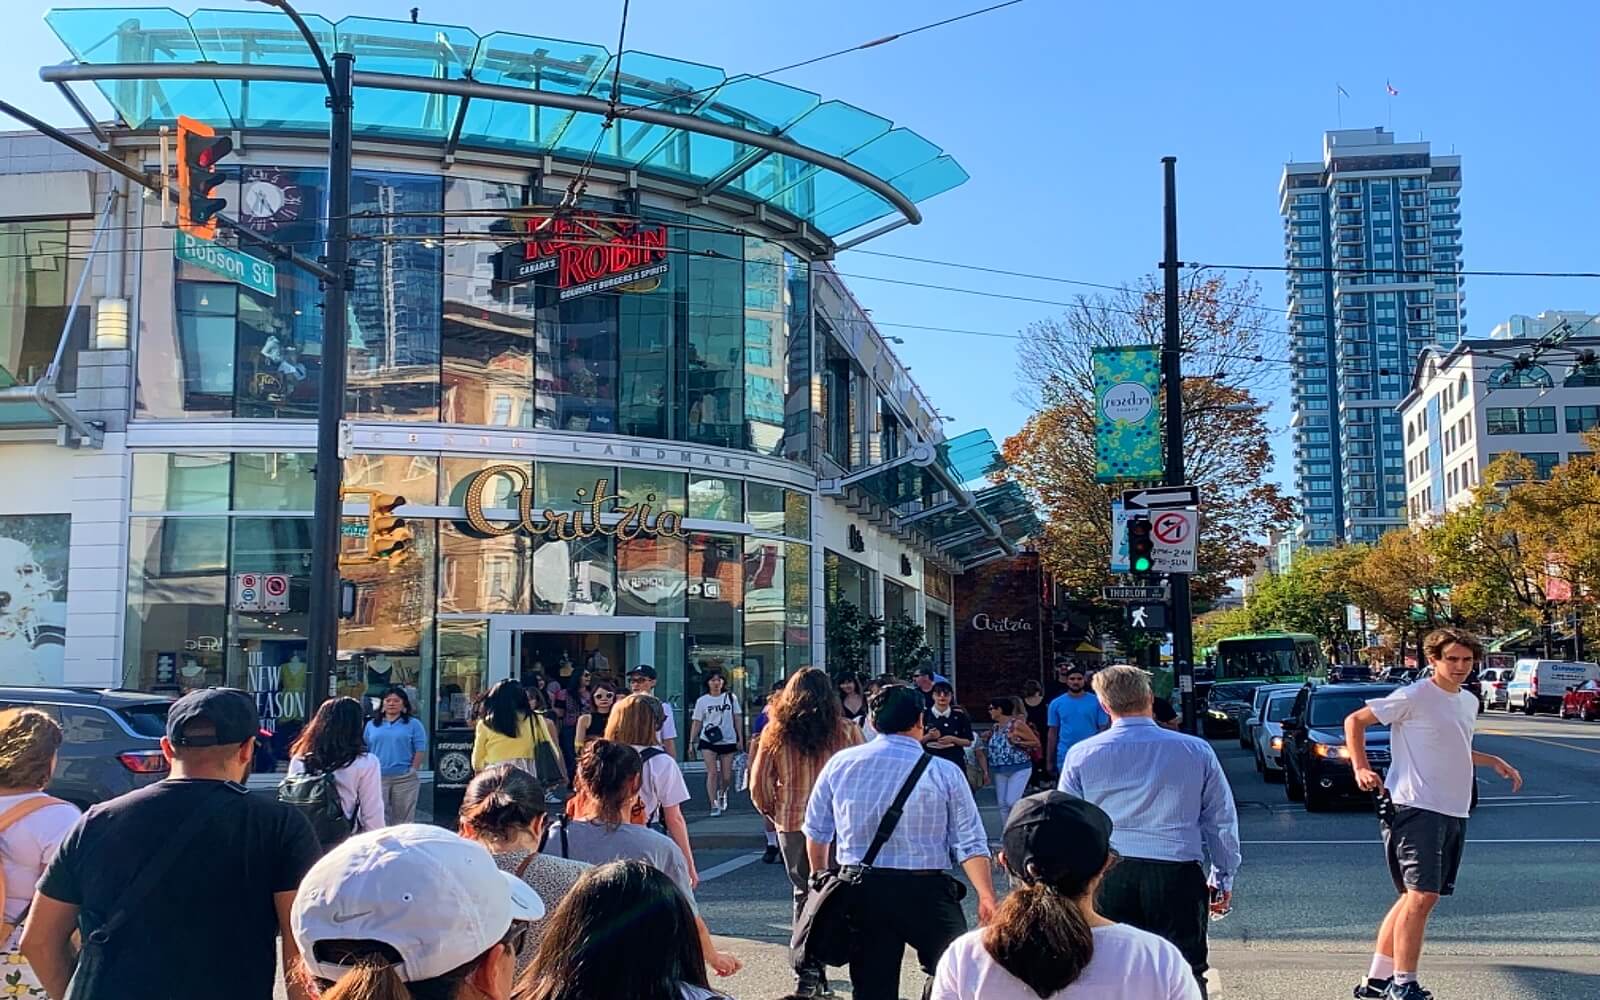 Top 10 Places to Shop in Vancouver, BC